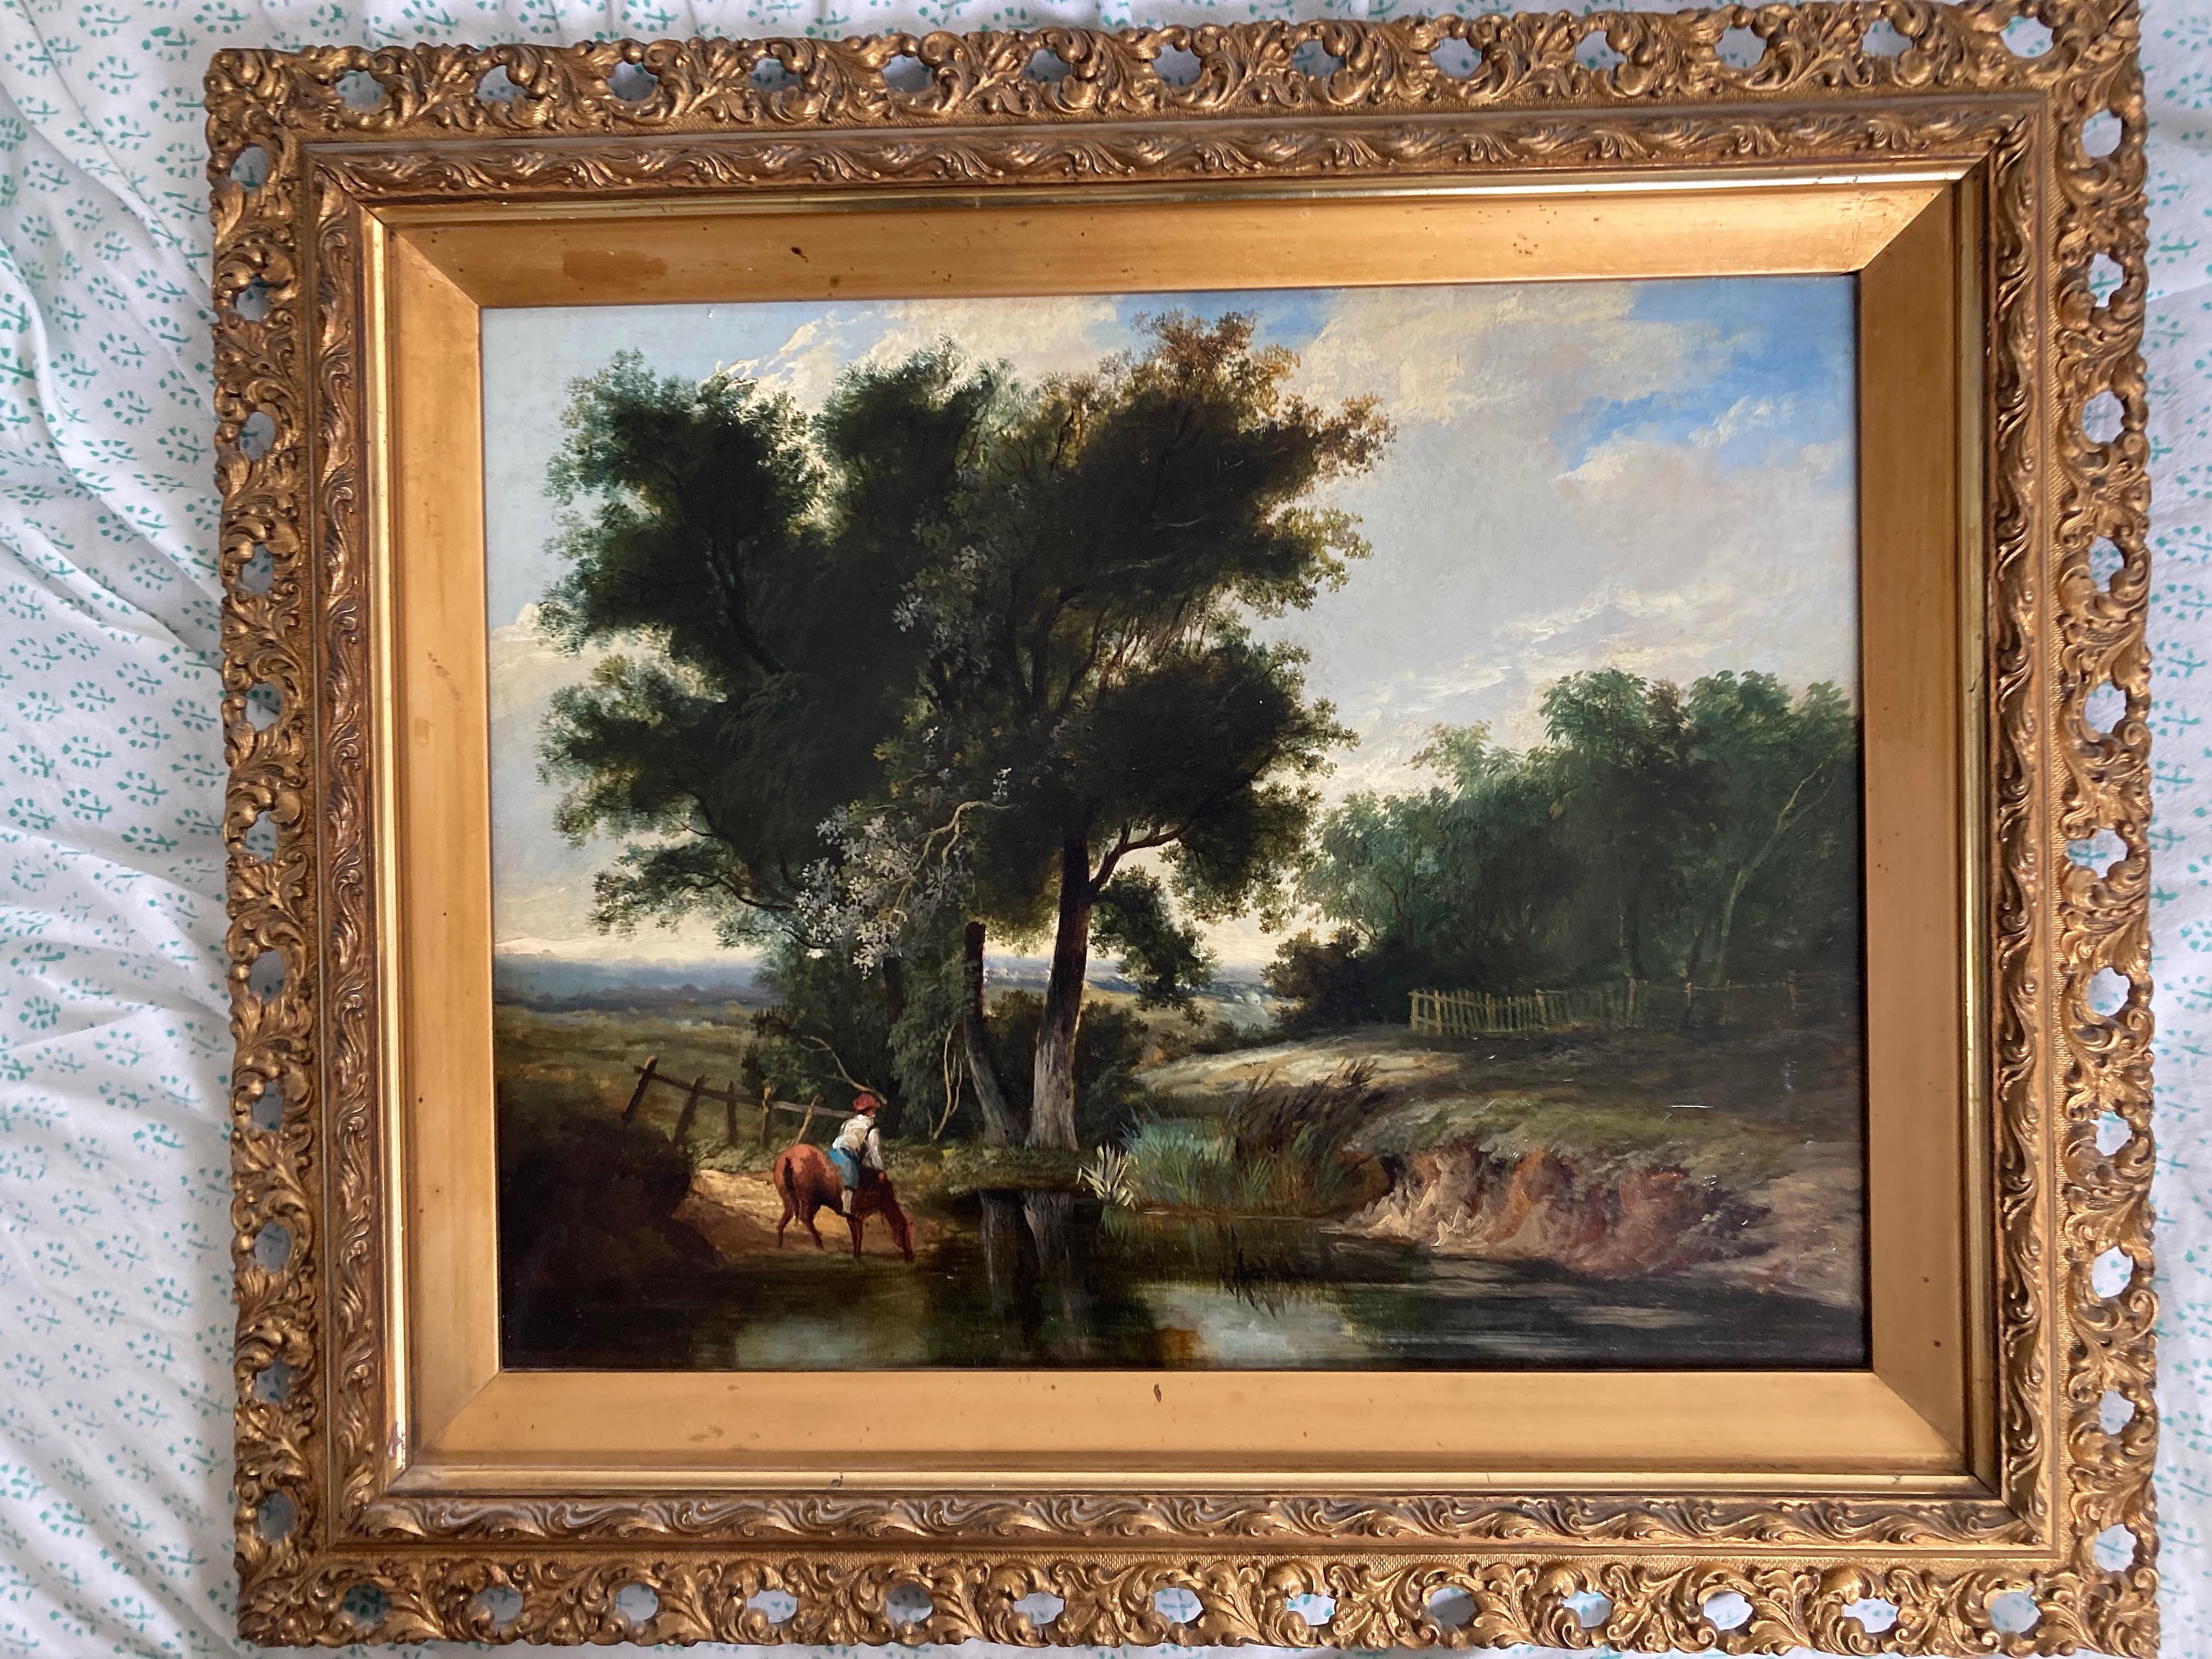 A charming rustic scene with a rider and his horse pausing on the banks of a brook.

Follower of William Joseph Shayer , mid 19th Century
A rider and his horse at a watering place
Oil on board
12 x 15 inches
17¾ x 21 inches including the